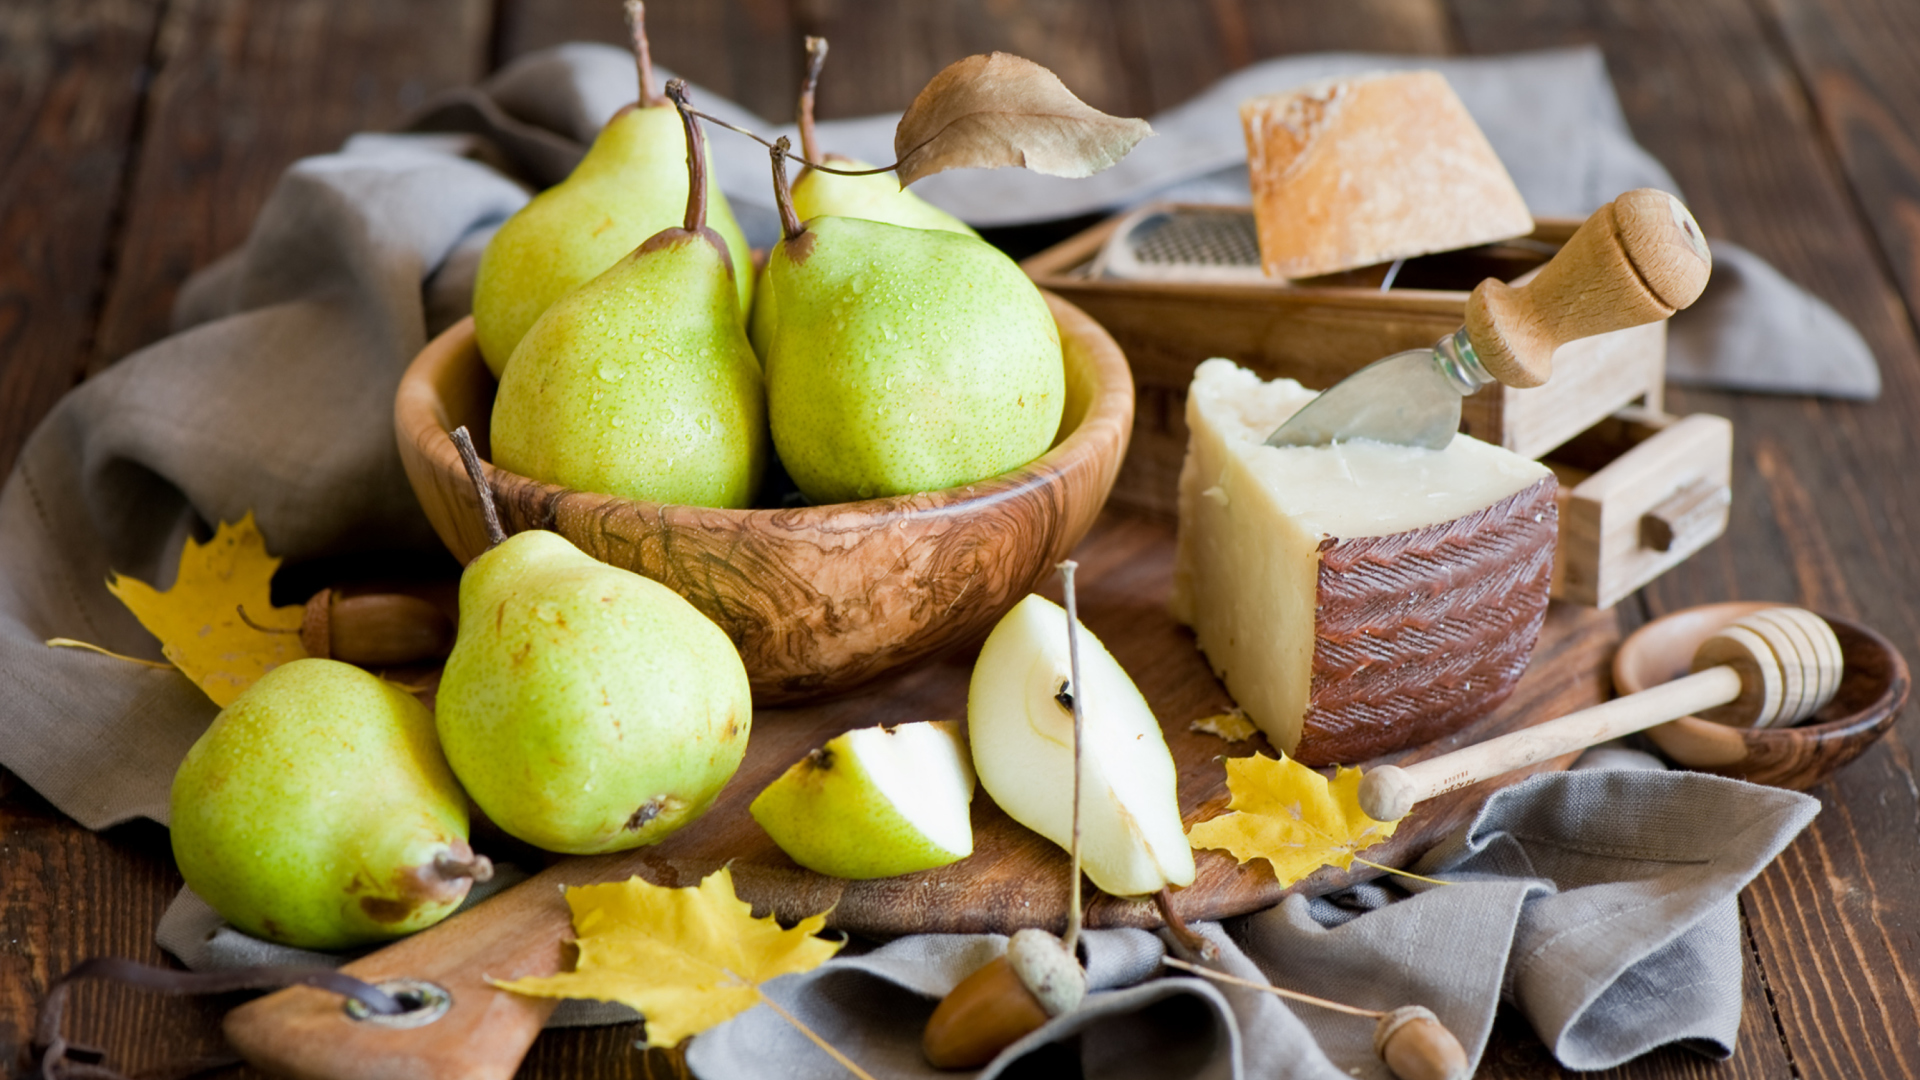 Pears And Cheese wallpaper 1920x1080